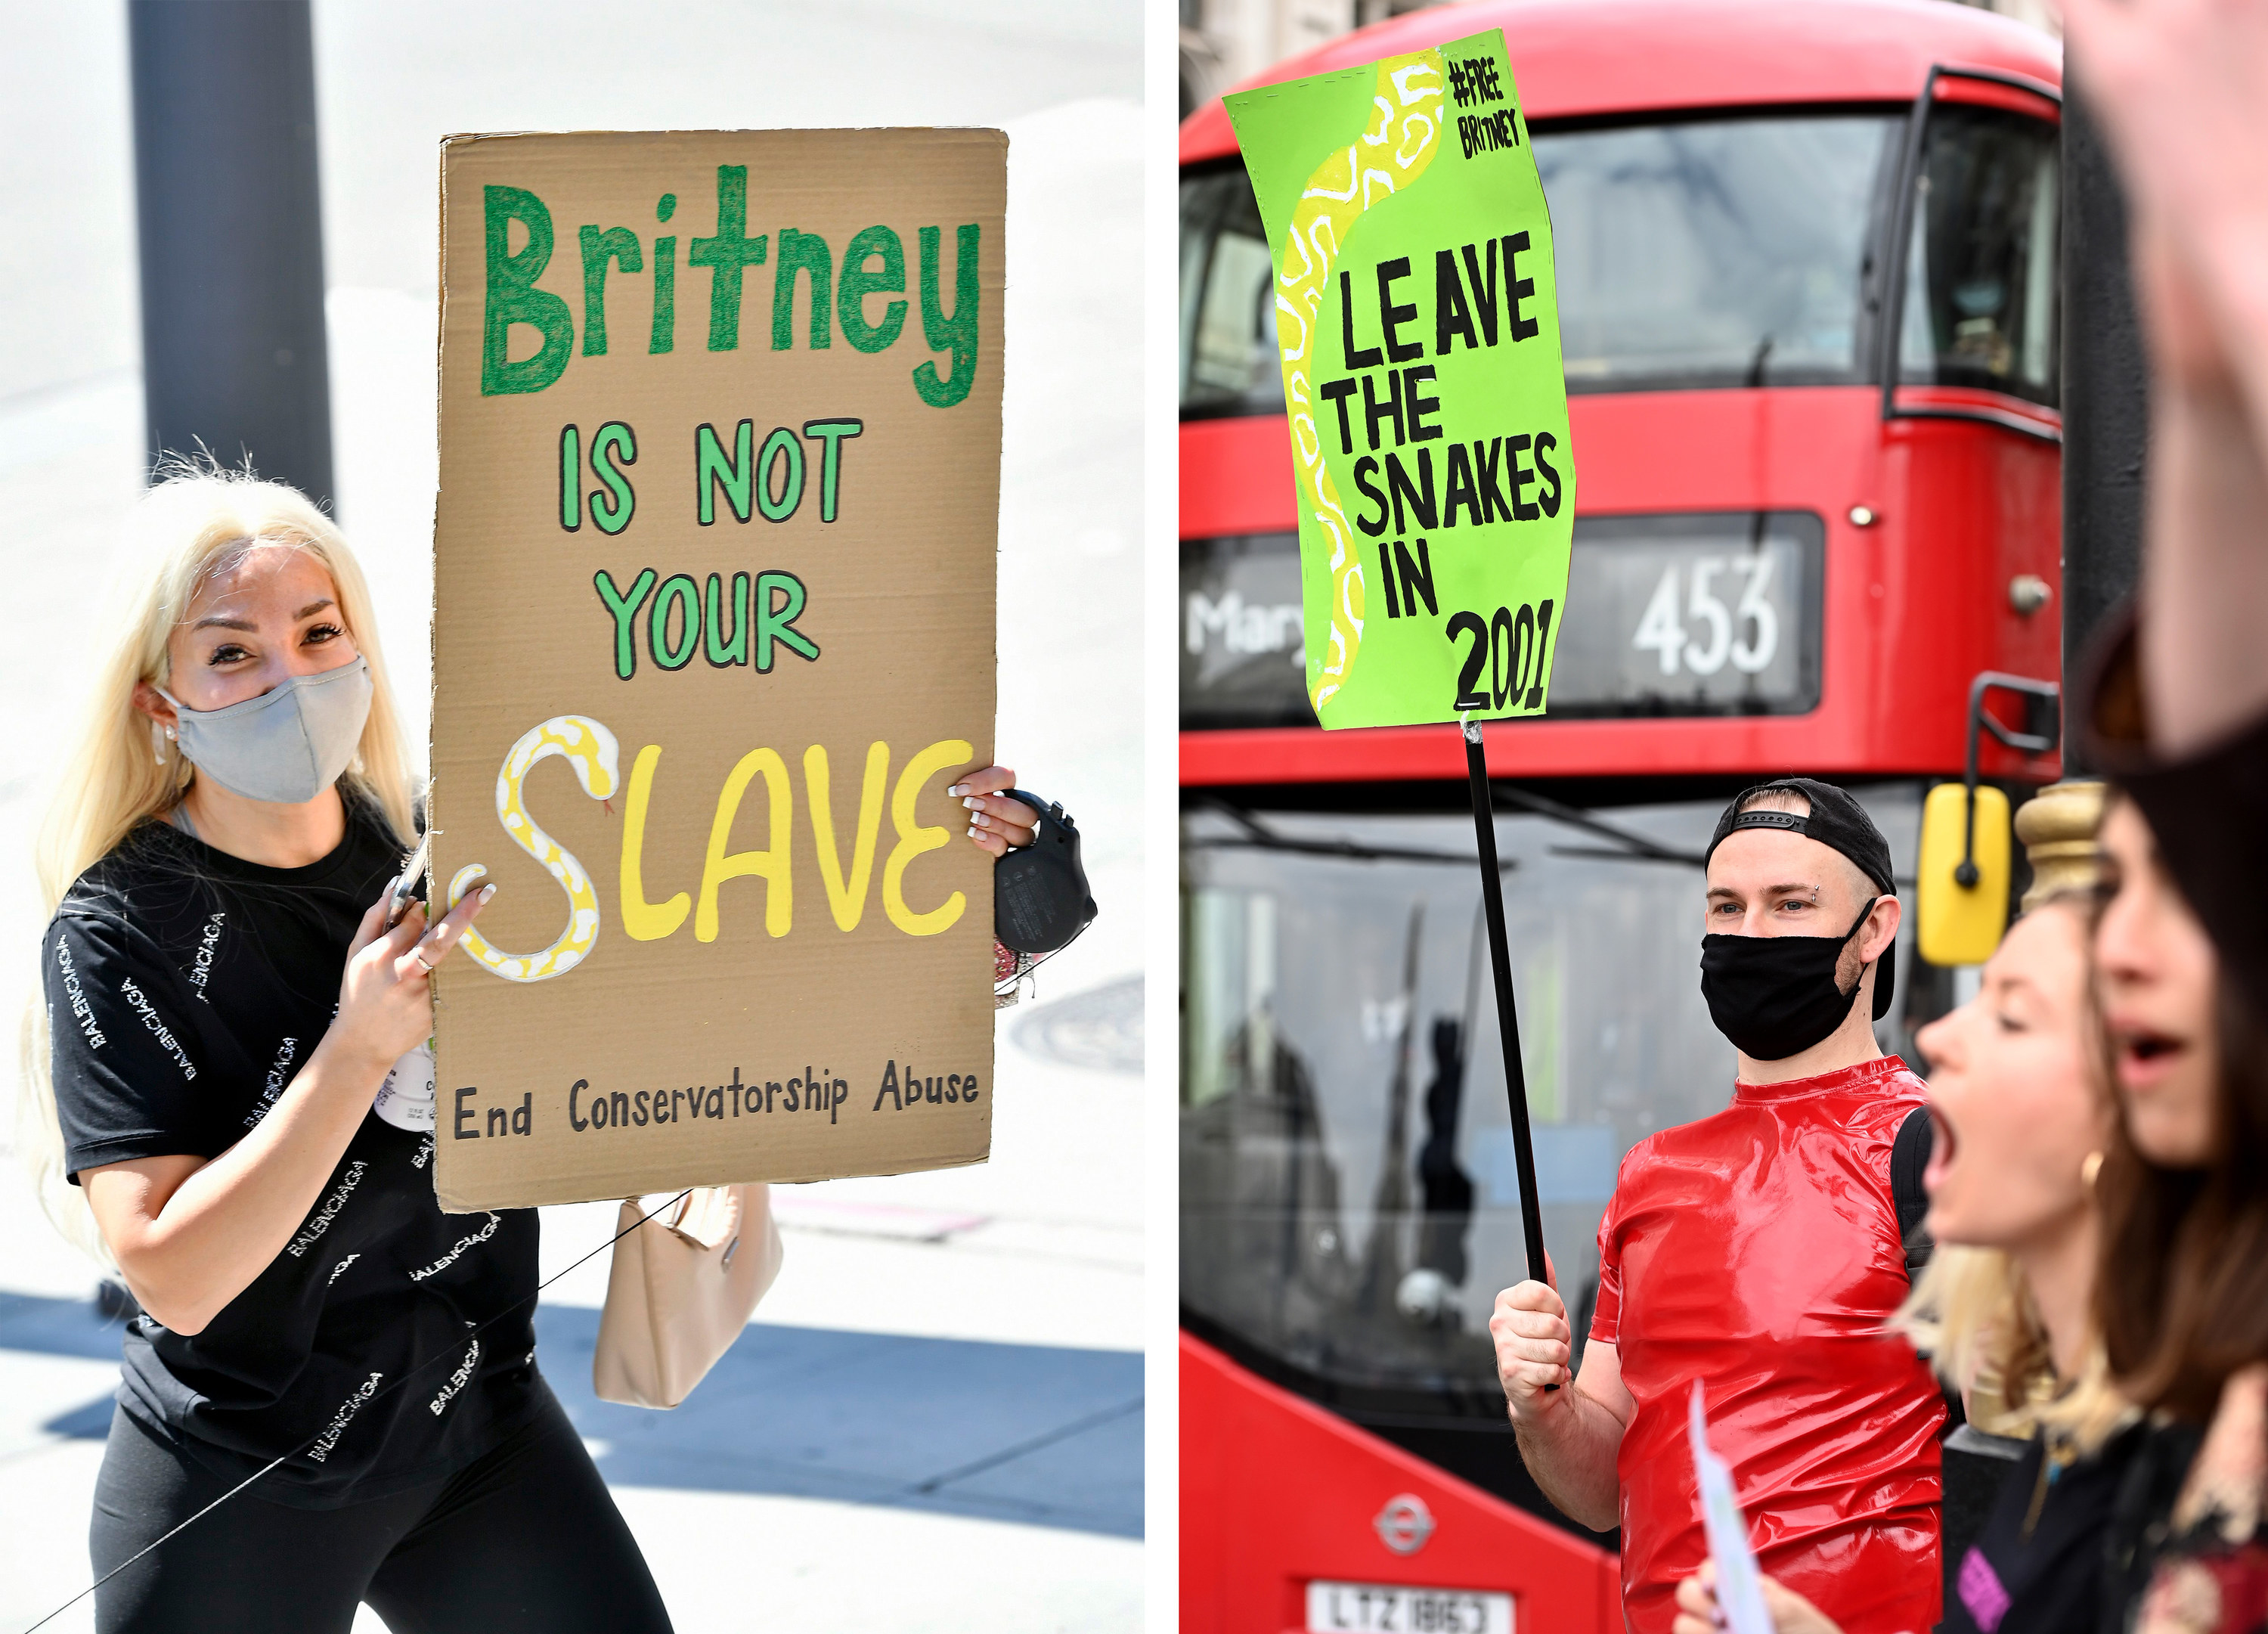 Protesters hold signs that read &quot;Britney is not your slave, end conservatorship abuse&quot; and &quot;Leave the snakes in 2001&quot;